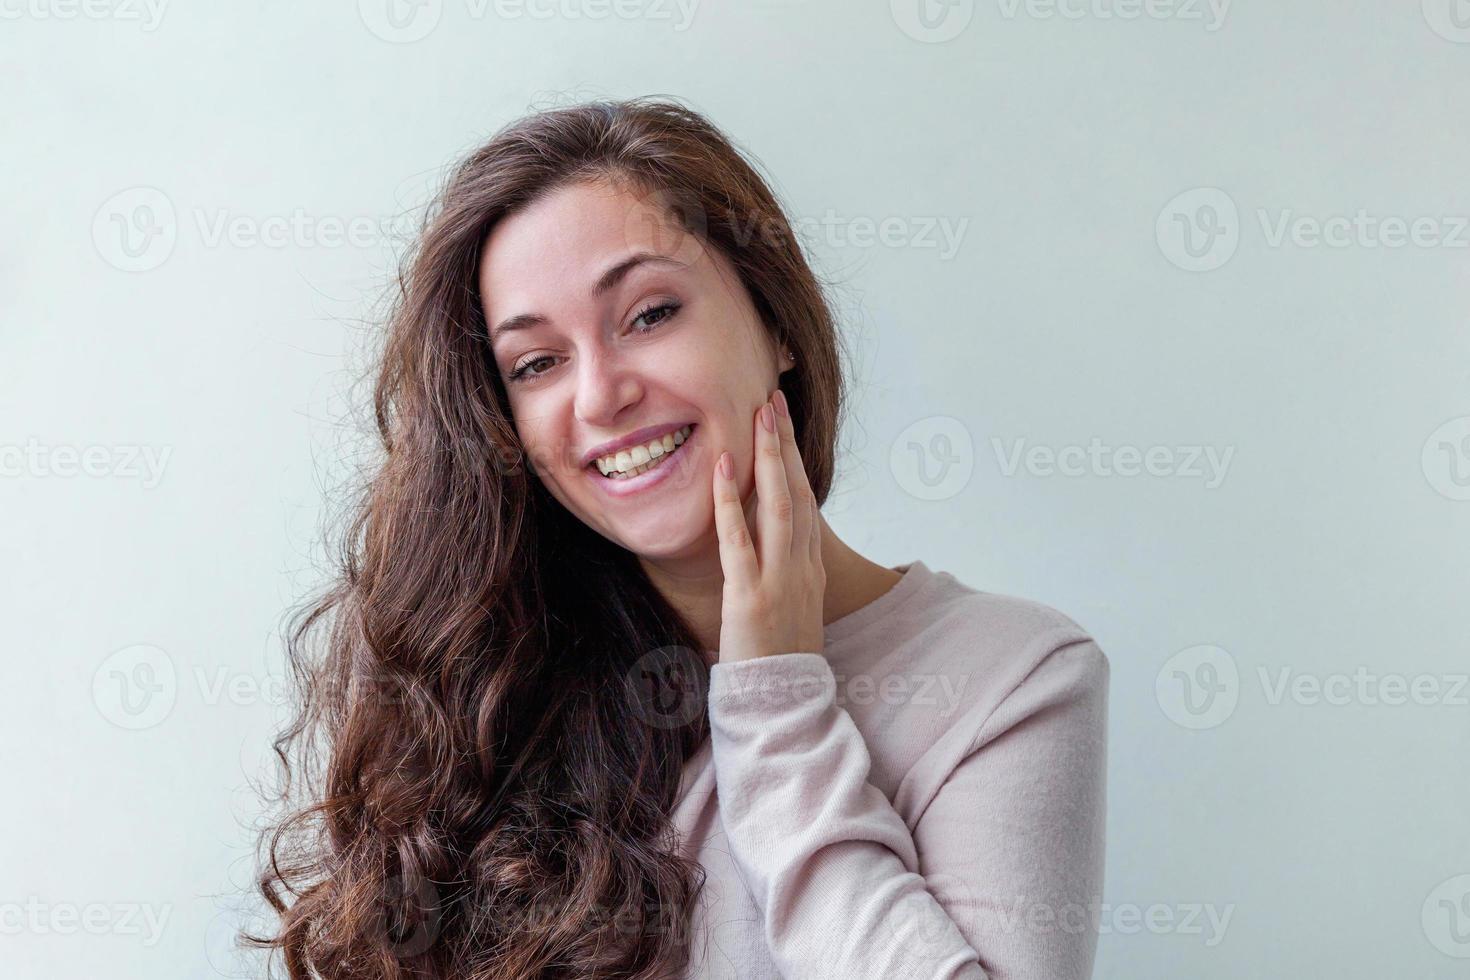 Happy girl smiling. Beauty portrait young happy positive laughing brunette woman on white background isolated. European woman. Positive human emotion facial expression body language. photo